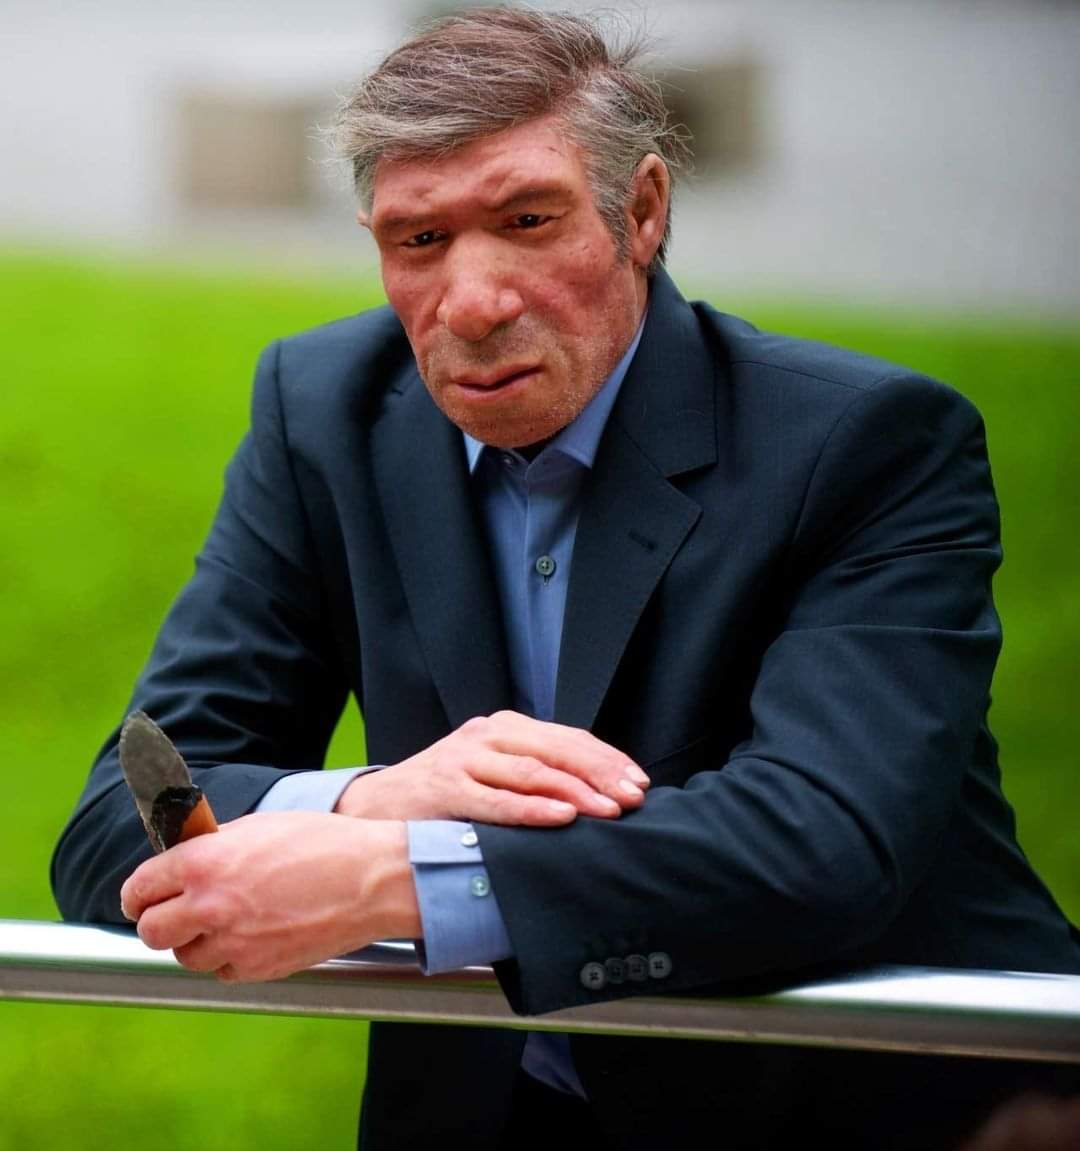 A reconstruction model of a 'Neanderthal Man' in modern clothing; stands in front of Neanderthal Museum in Mettmann, Germany. He's leaning on the railing in the exhibit as if he was a normal visitor taking a break.

Neanderthals are an extinct species or subspecies of archaic